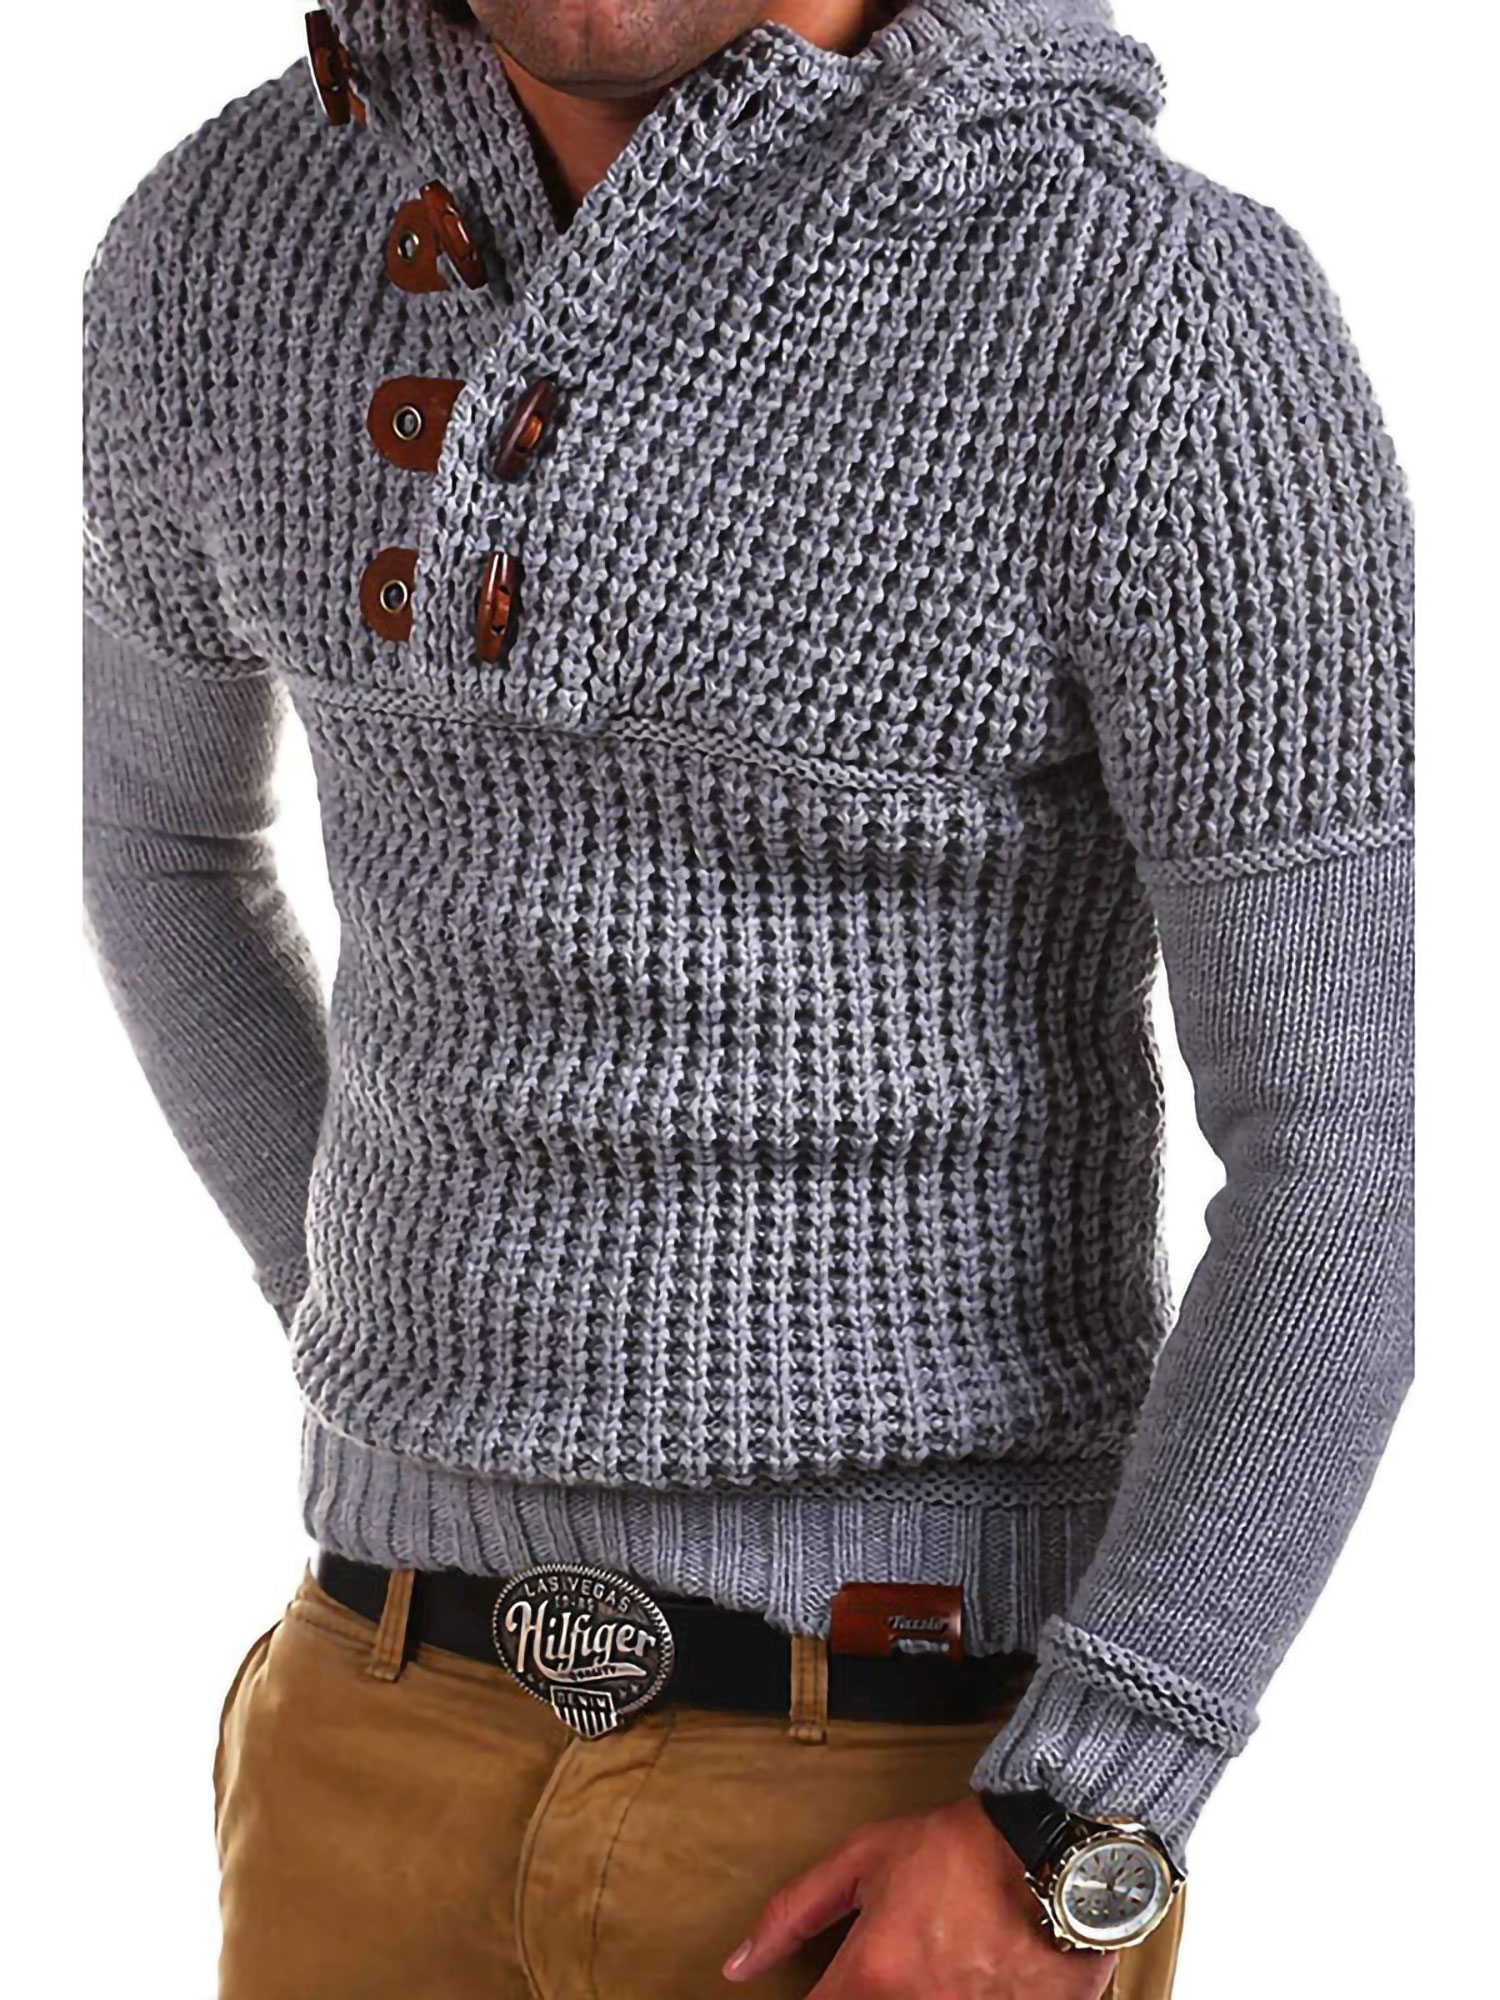 Niuer Mens Outdoor Thermal Hoodies Casual Solid Knitted Pullover Top Long Sleeve Button Placket Sweater Jumper - image 1 of 2